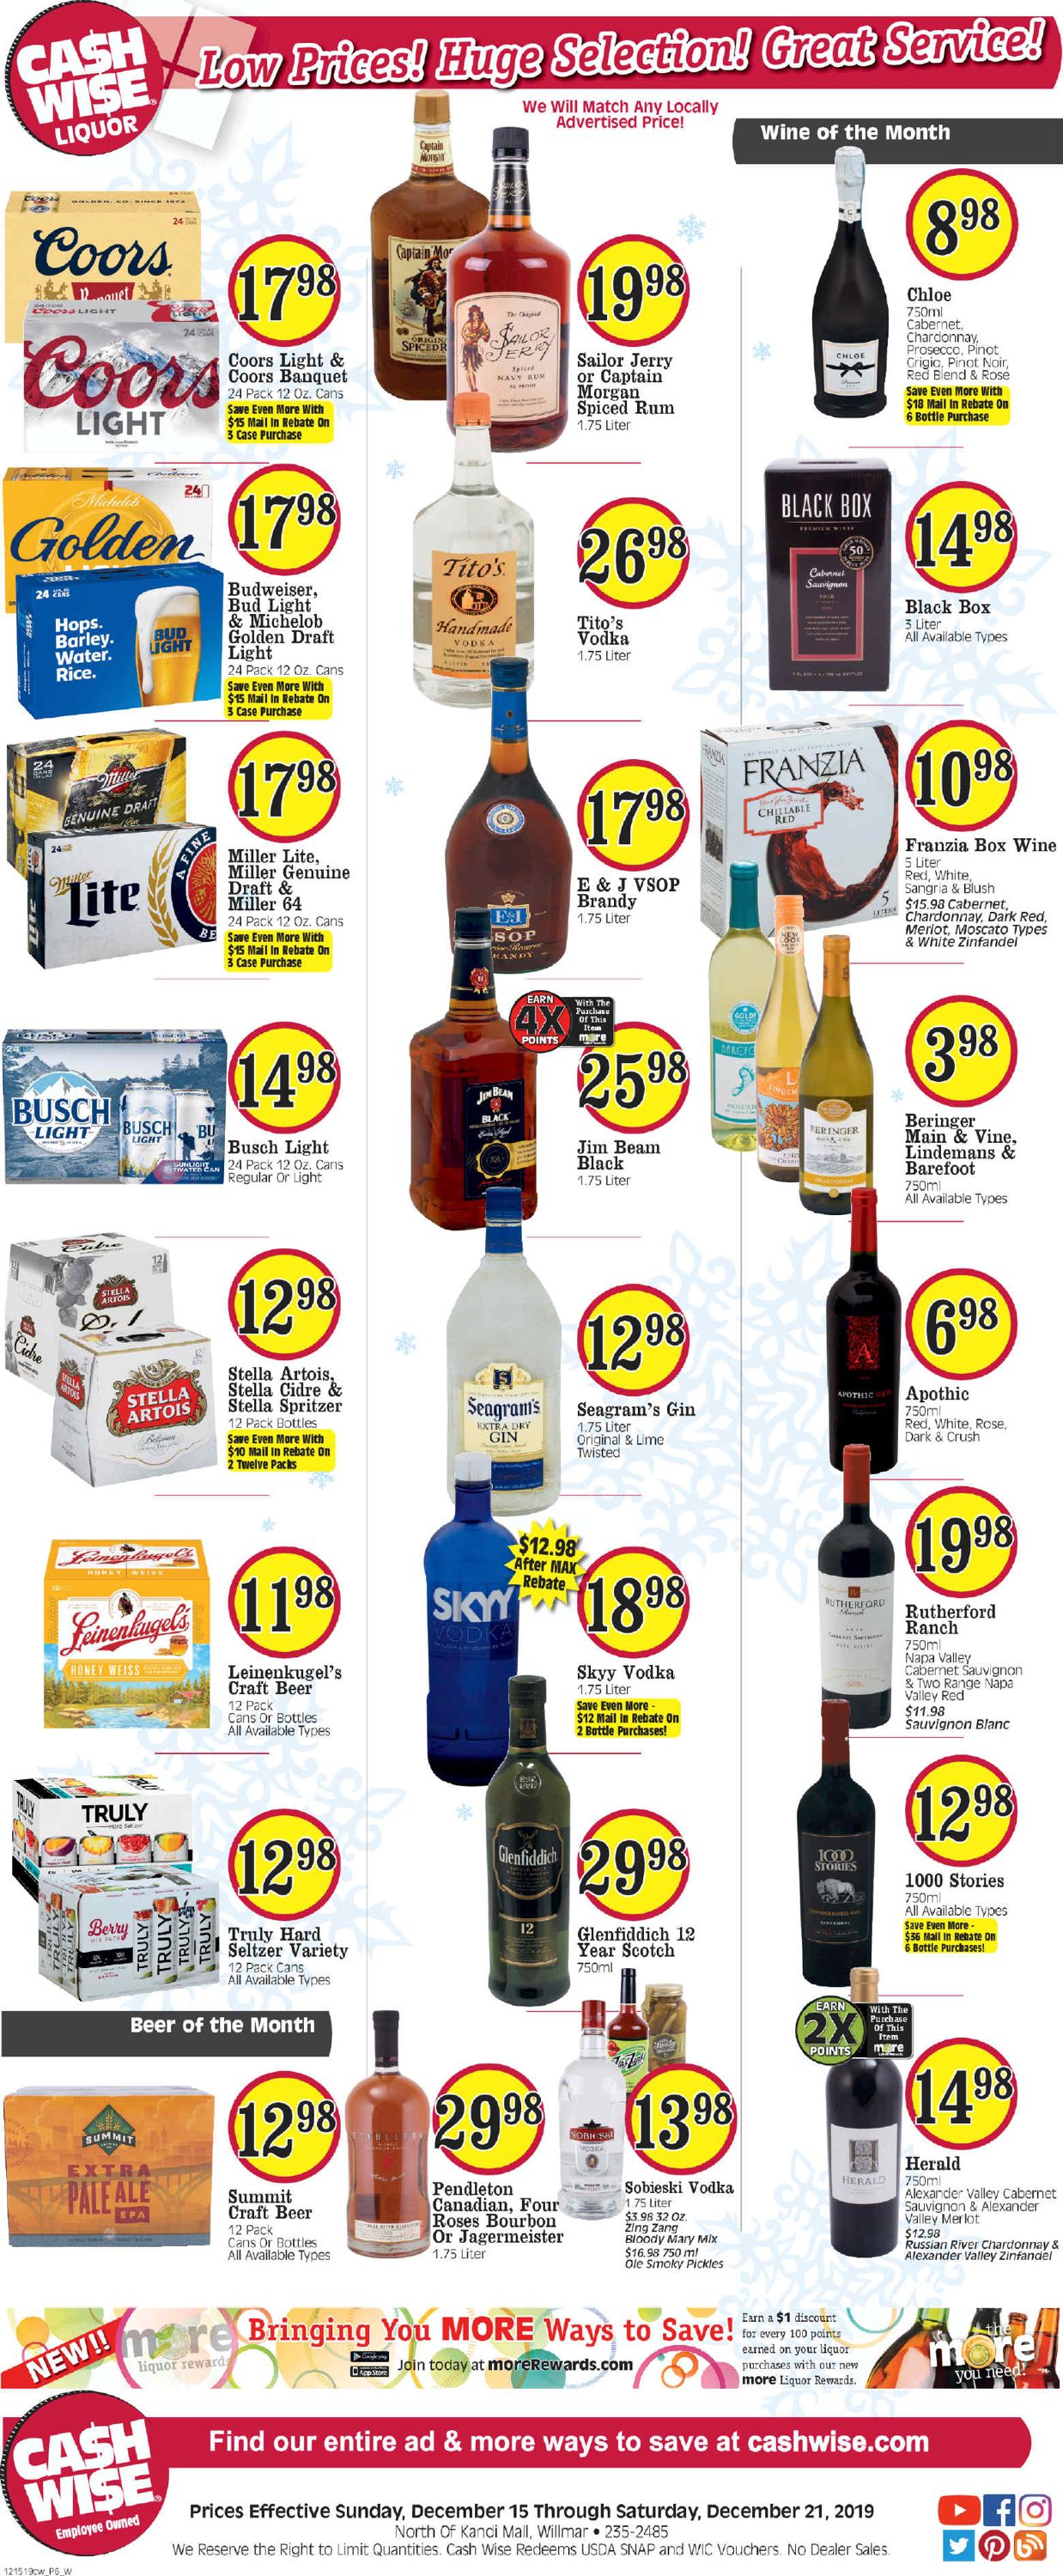 Cash Wise Weekly Ad Circular - valid 12/15-12/21/2019 (Page 6)